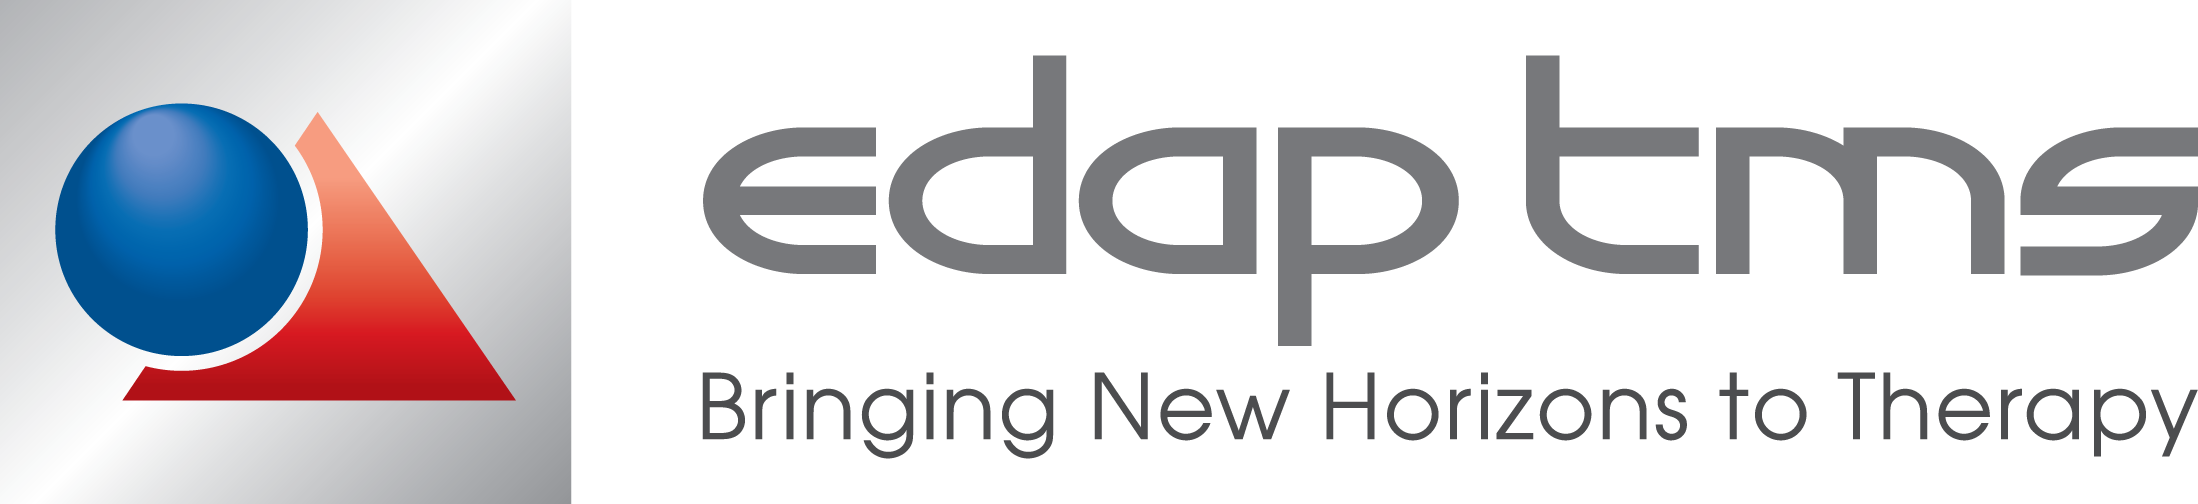 New CPT Code Established for EDAP’s Focal One Prostate ...